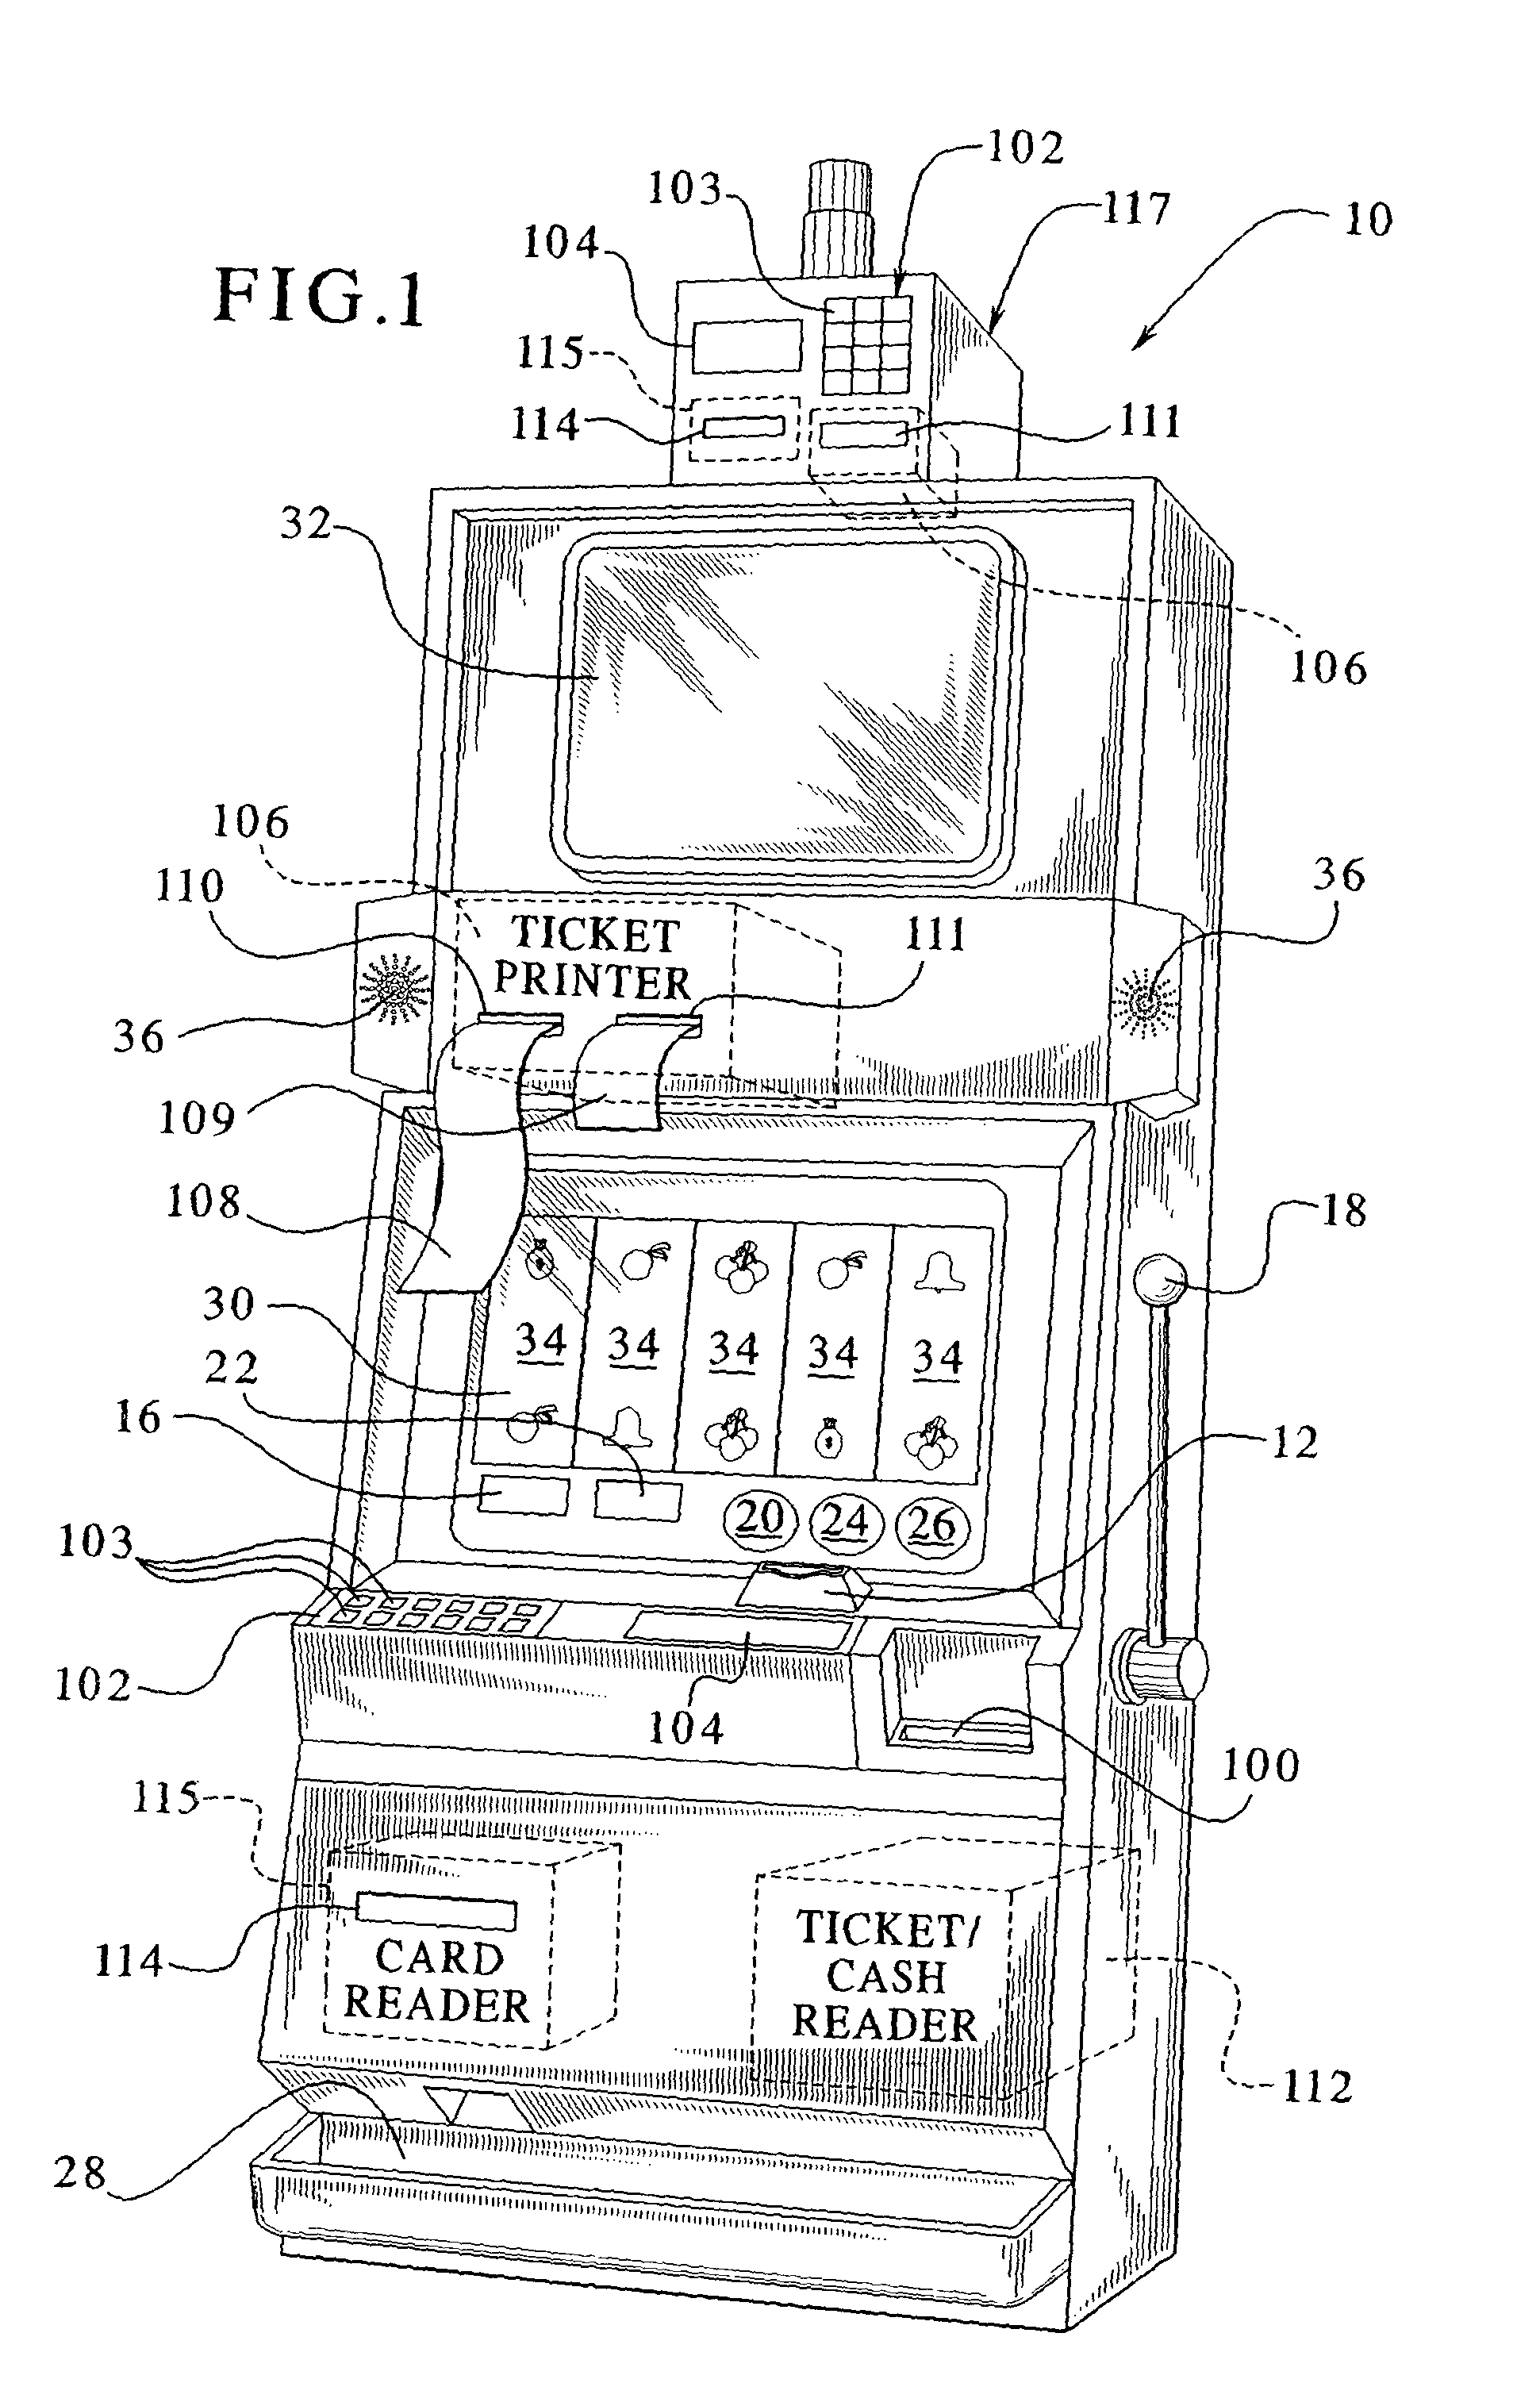 Gaming device having an electronic funds transfer system